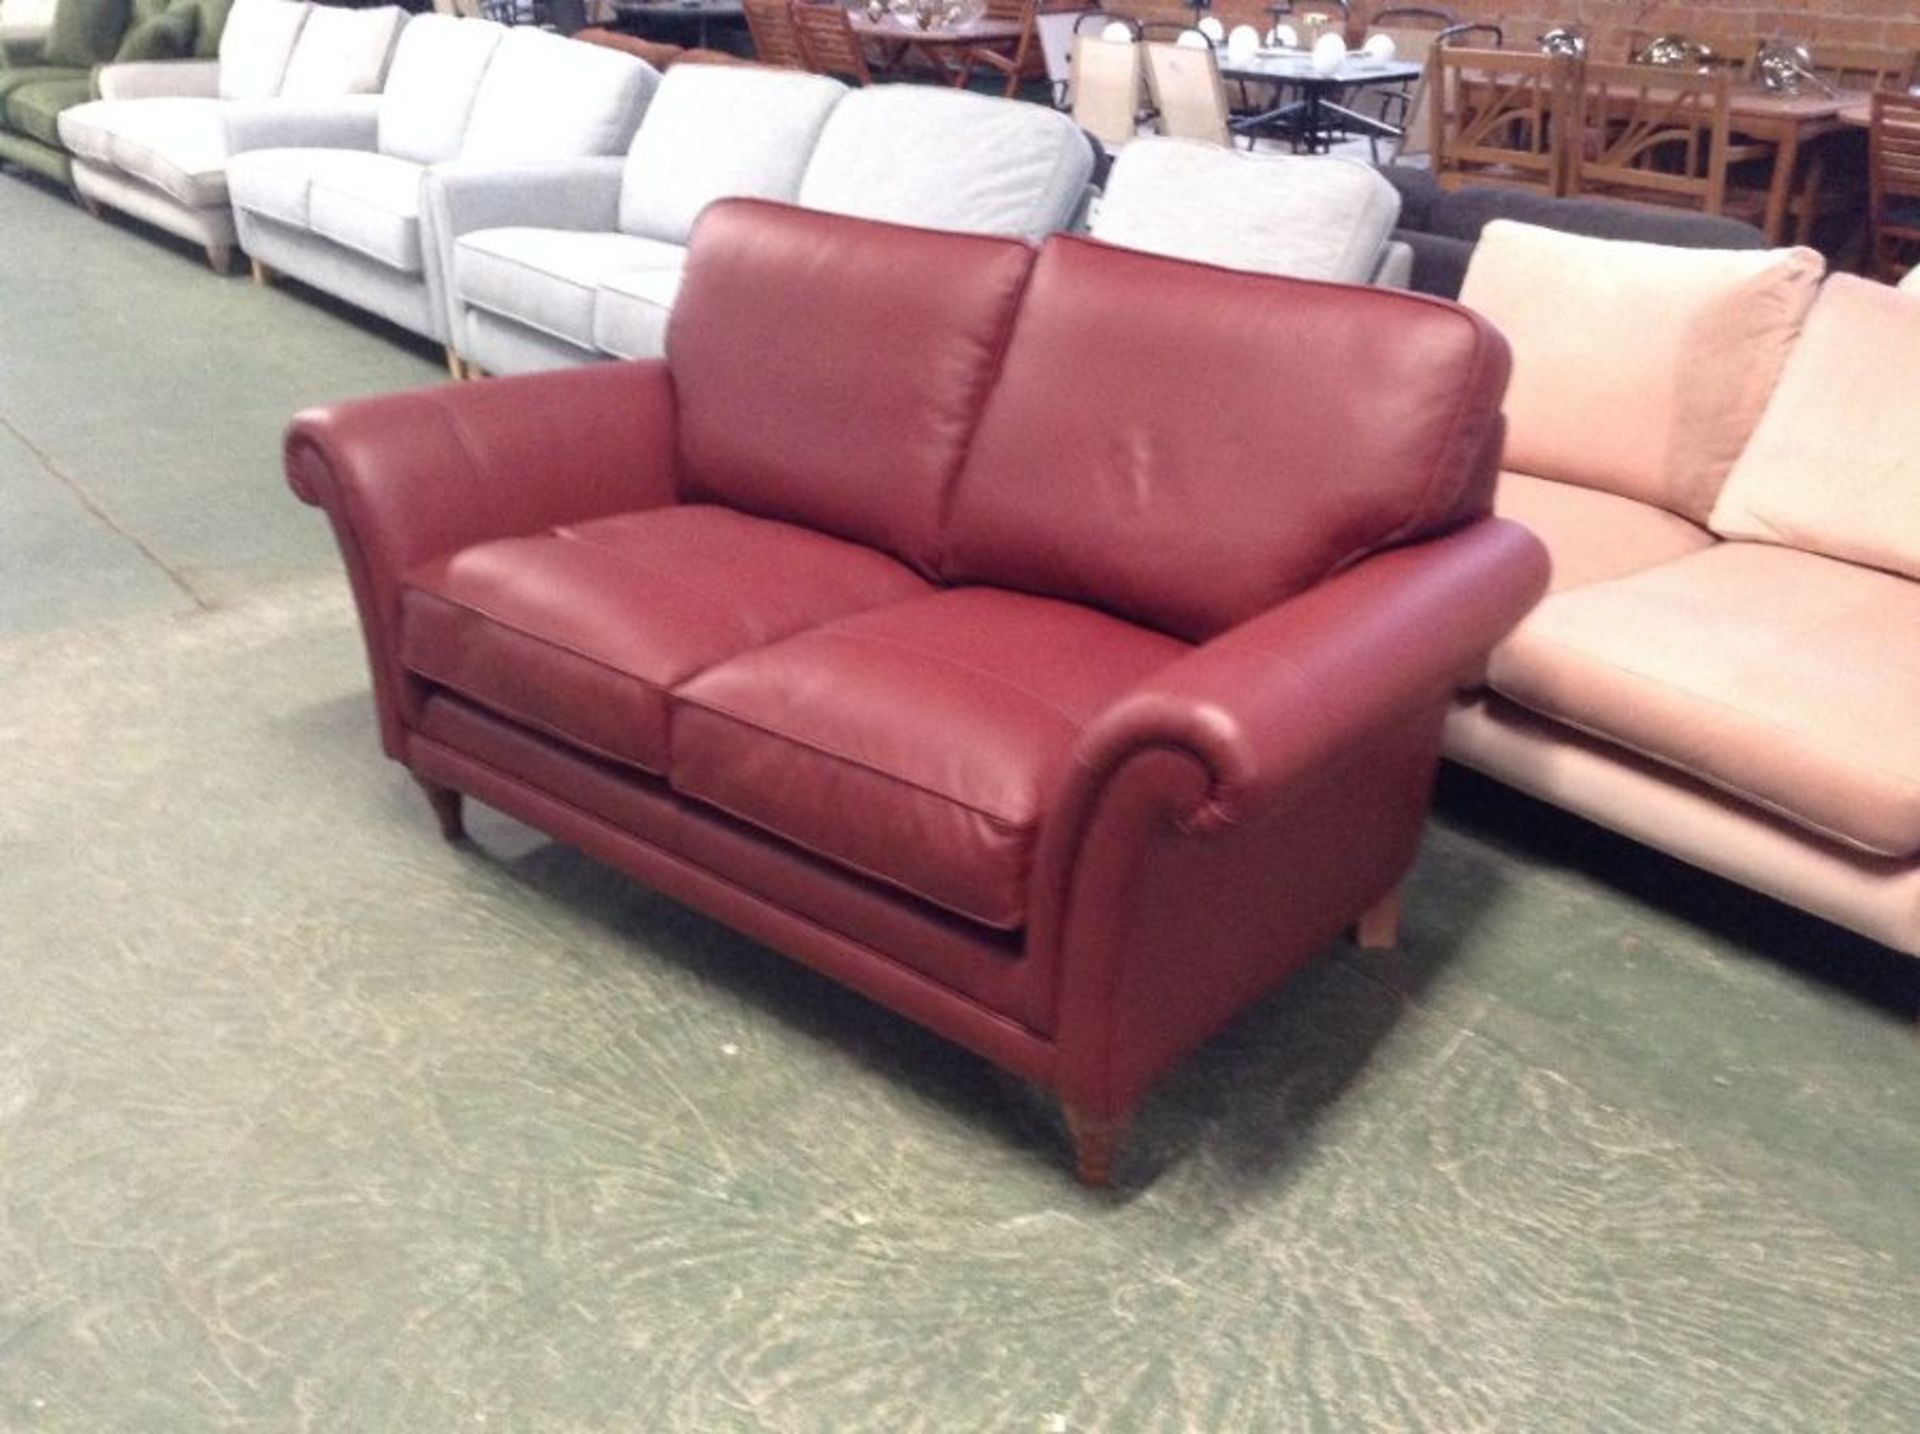 RED LEATHER 2 SEATER SOFA (TR002317 - WO1044256)